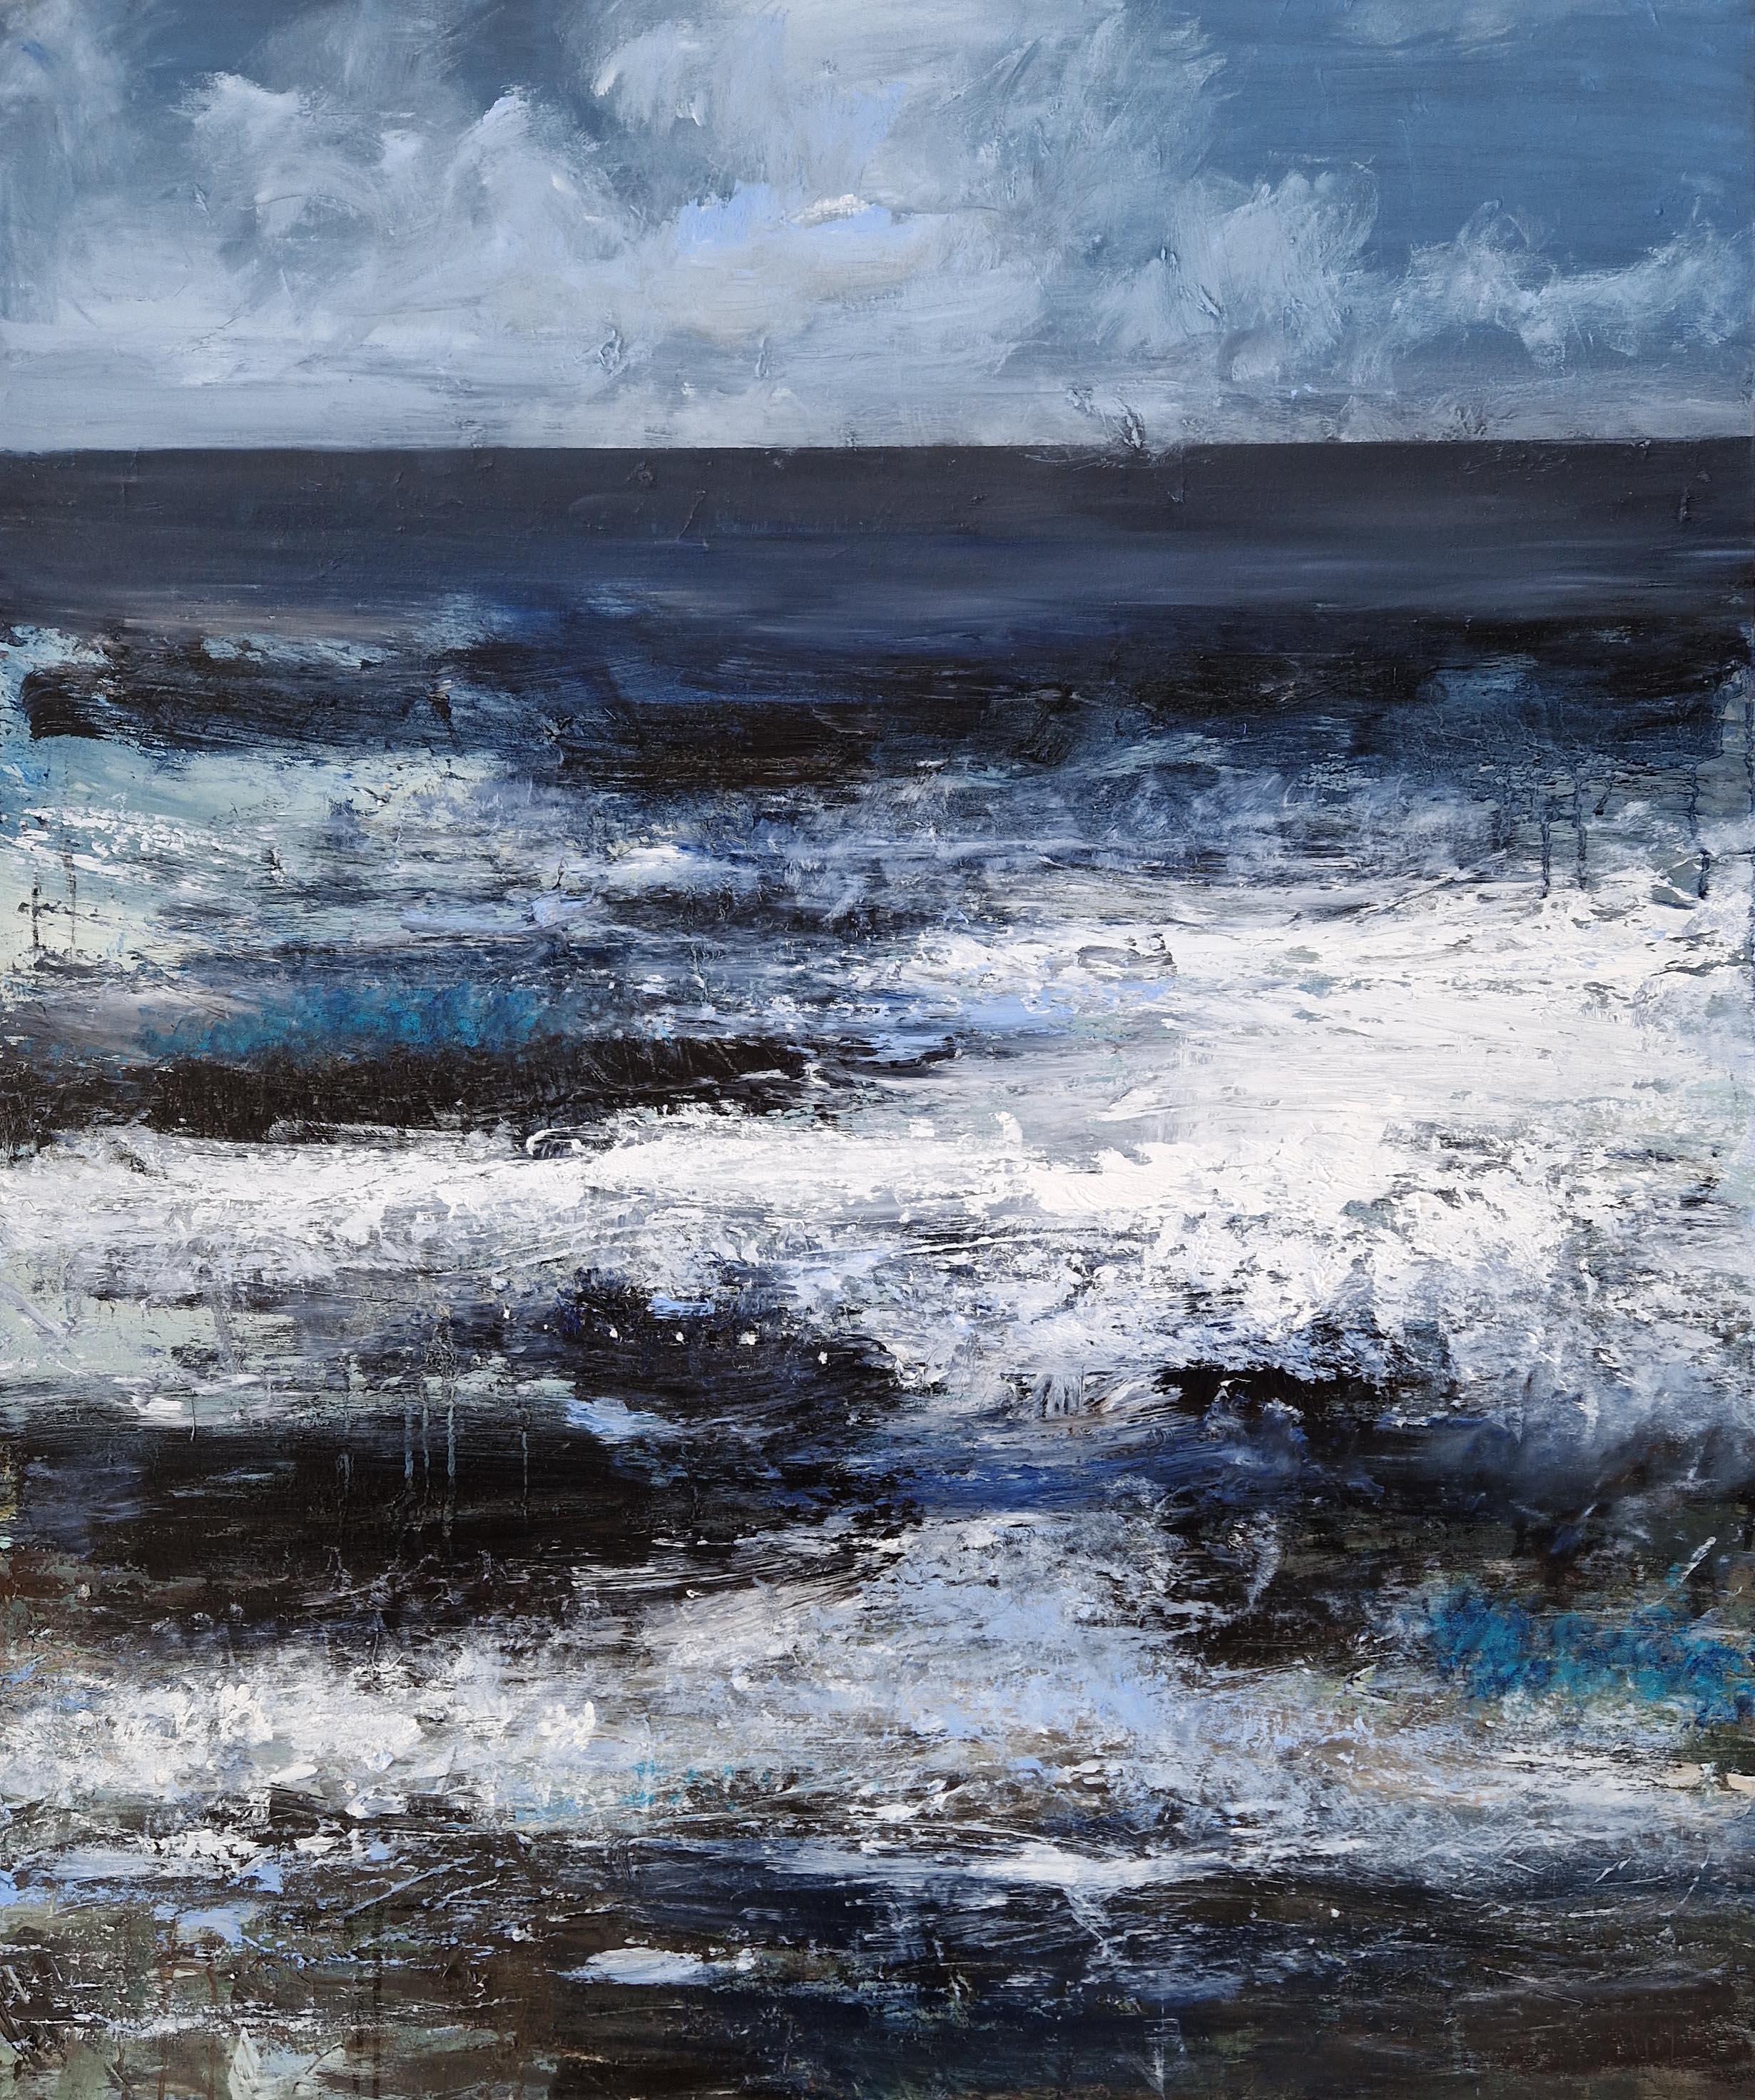 Sea Spray and Salt in the Air VI - Painting by Hannah Ivory Baker